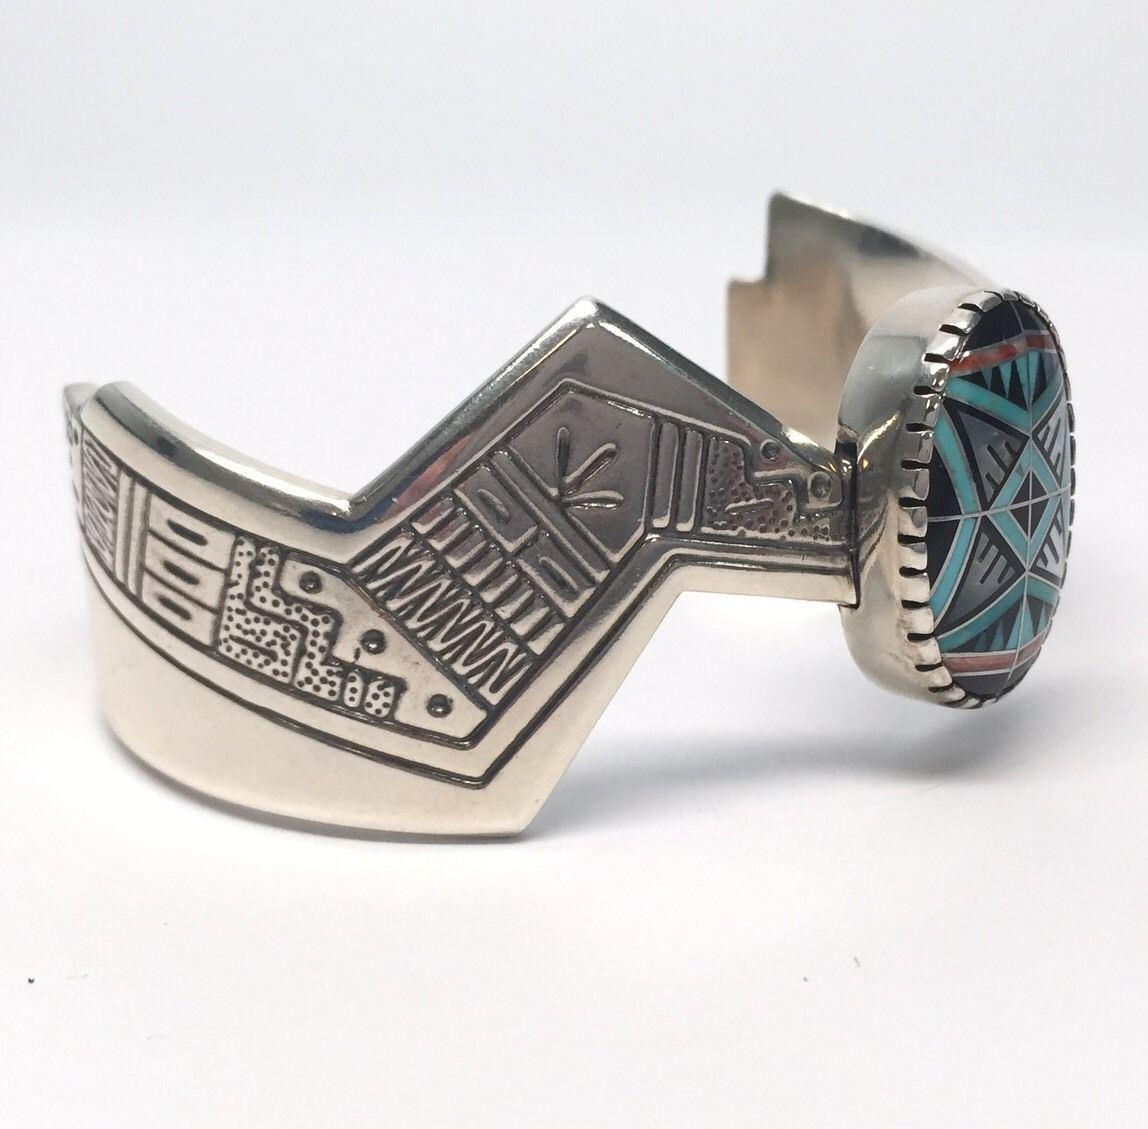 Roderick Tenorio Relios sterling silver multi-stone inlay Morning Star cuff bracelet. Stones include turquoise, onyx, coral, and mother of pearl.

Marking: Relios hallmark, .925, ©, RMT, Sterling.

Measures approx. 5 1/8